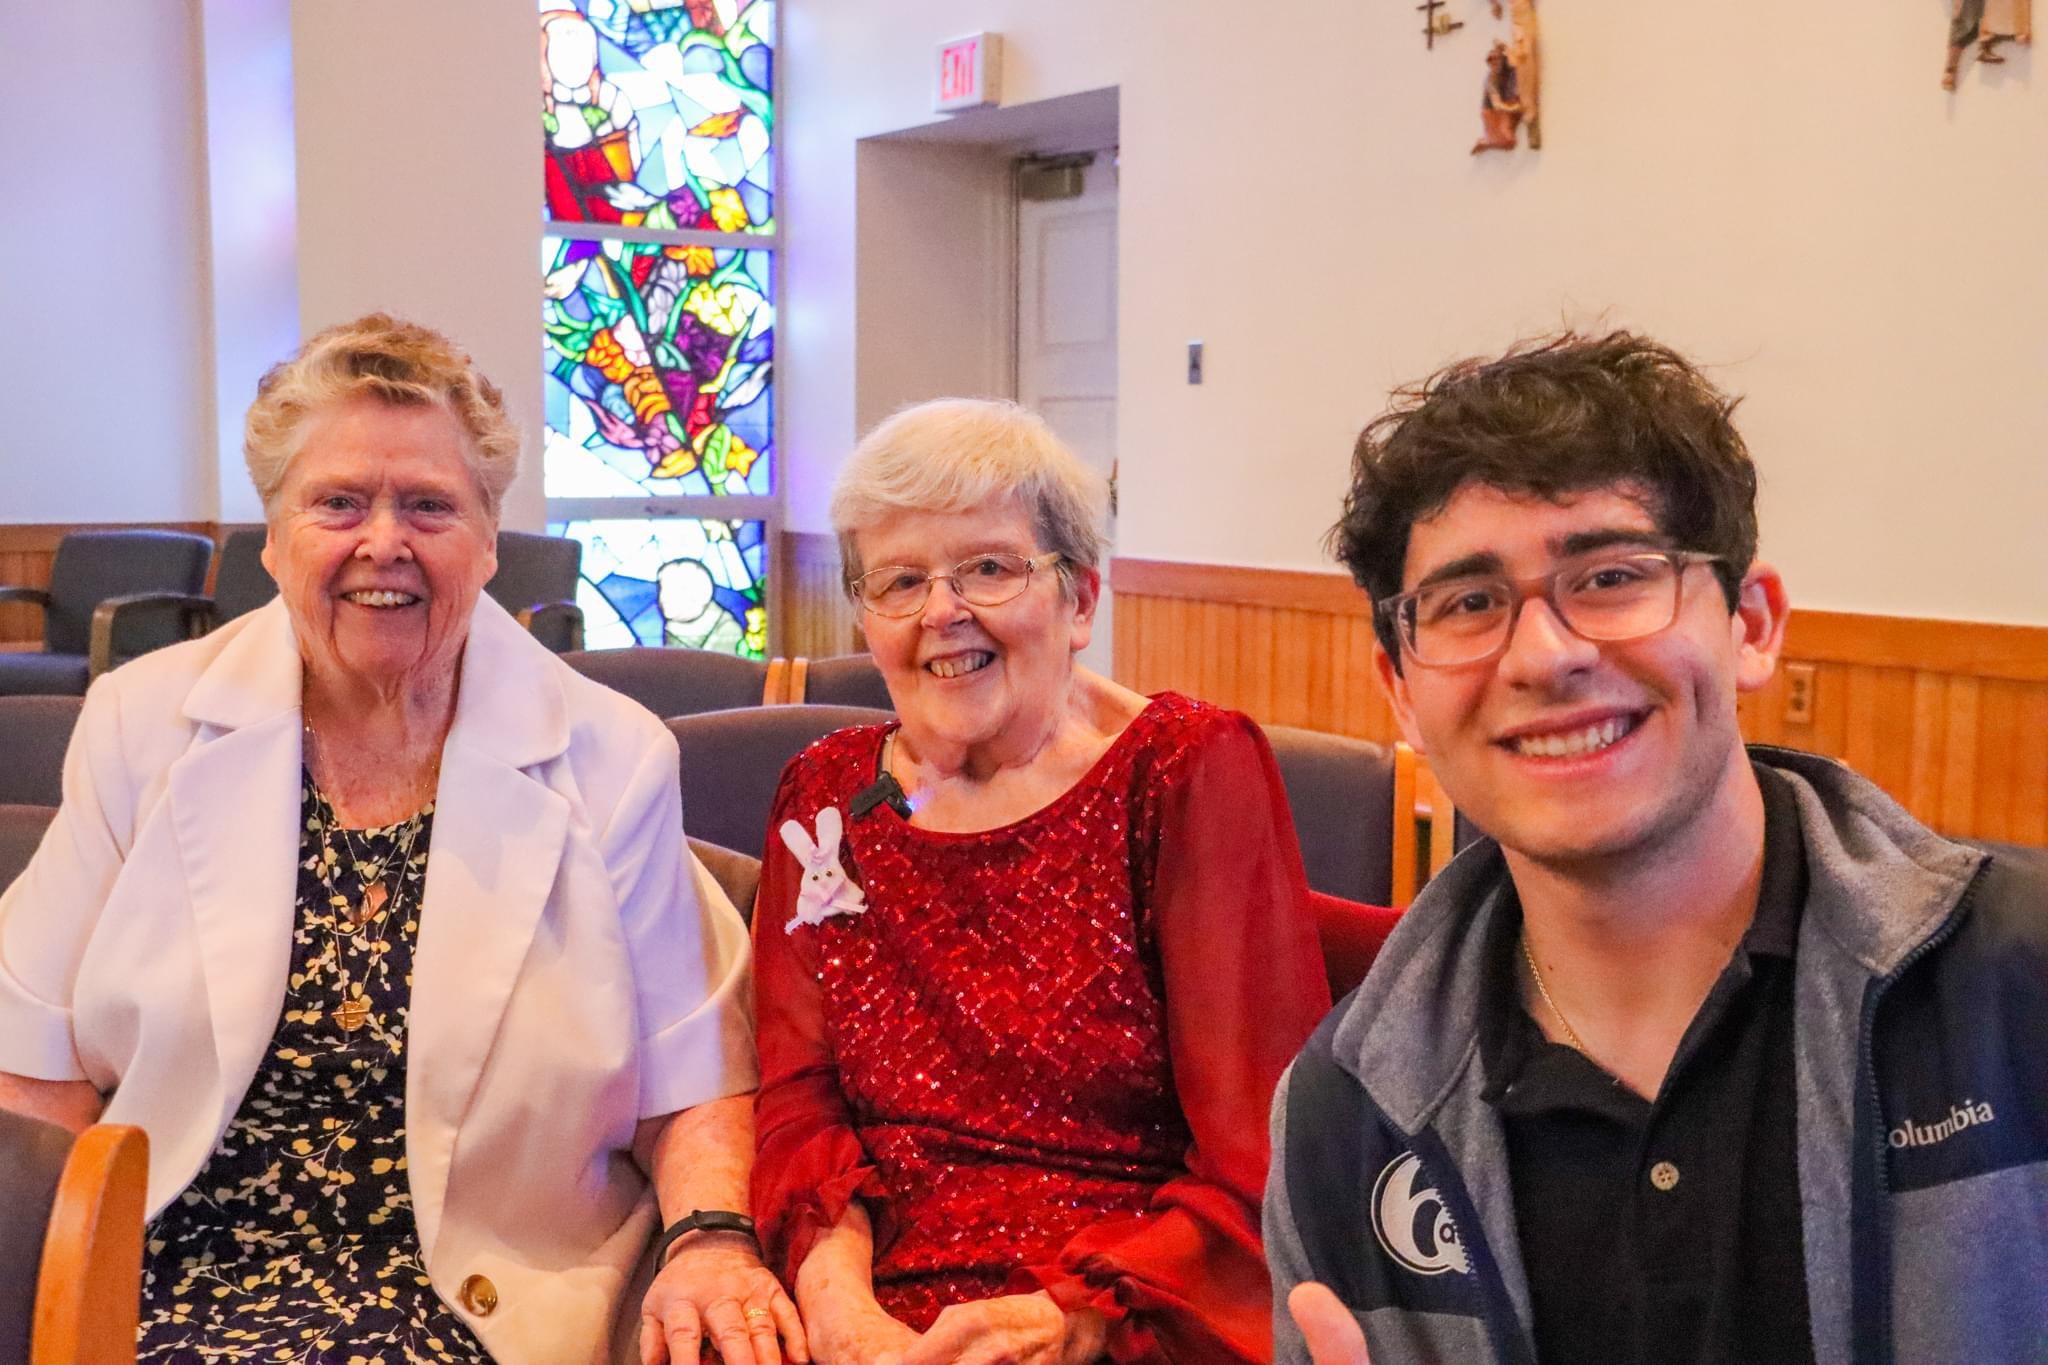 Inclusivity is brought to the altar celebrating Easter for people with disabilities